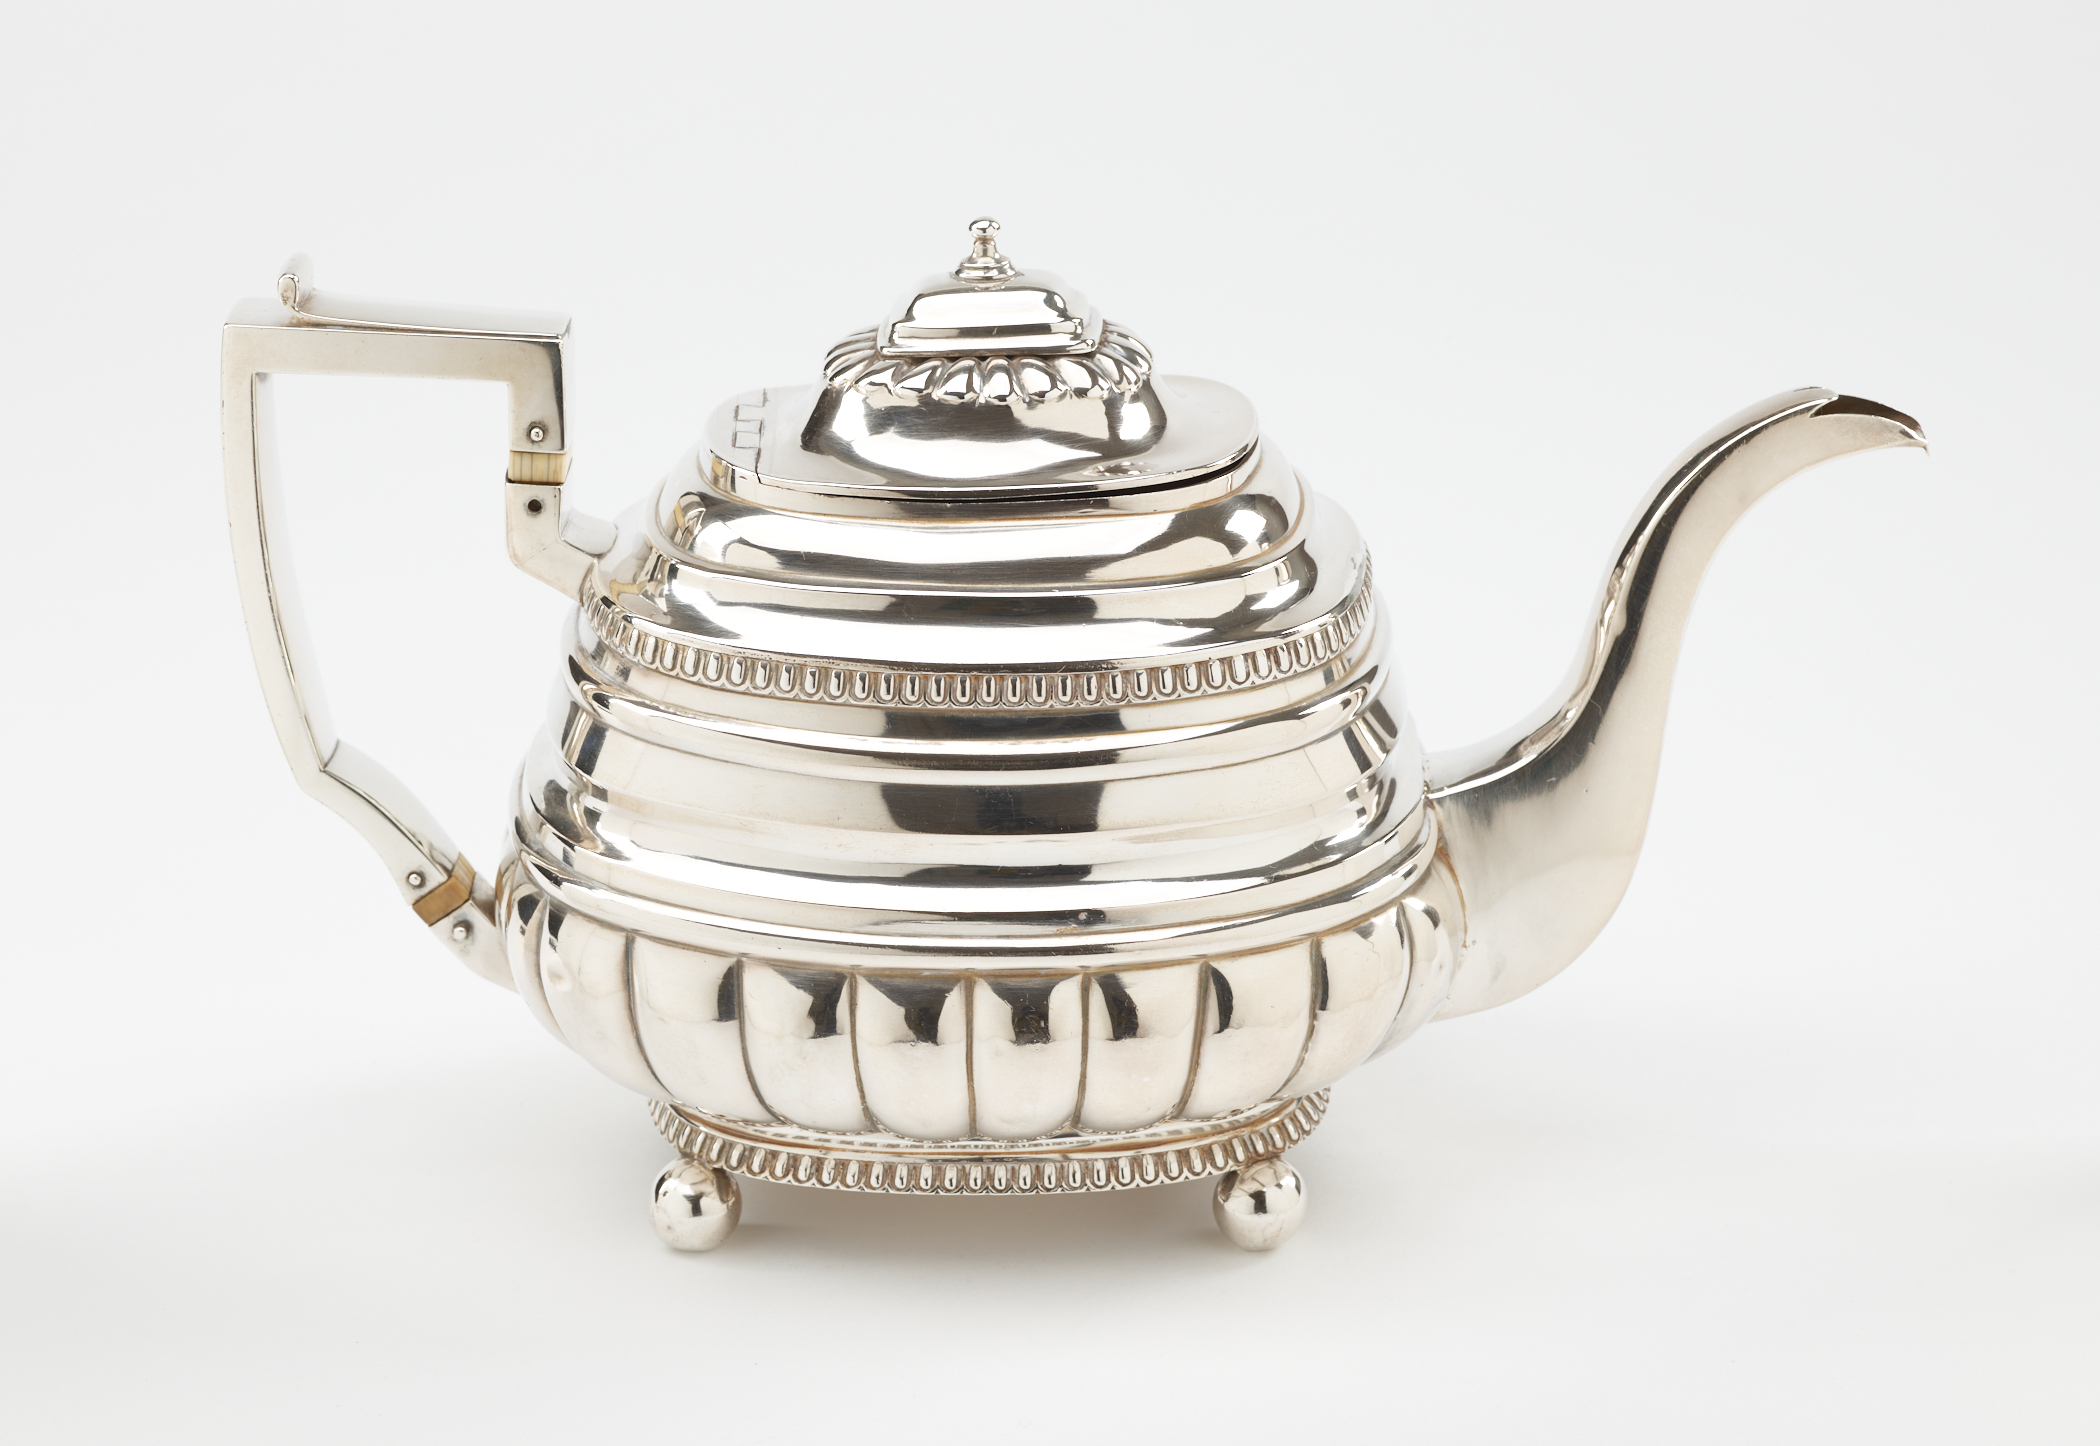 /A%20silver%20luster%20teapot%20with%20a%20decorative%20angular%20handle%2C%20a%20rounded%20square%20body%20and%20spout%20with%20sculptural%20decorations.